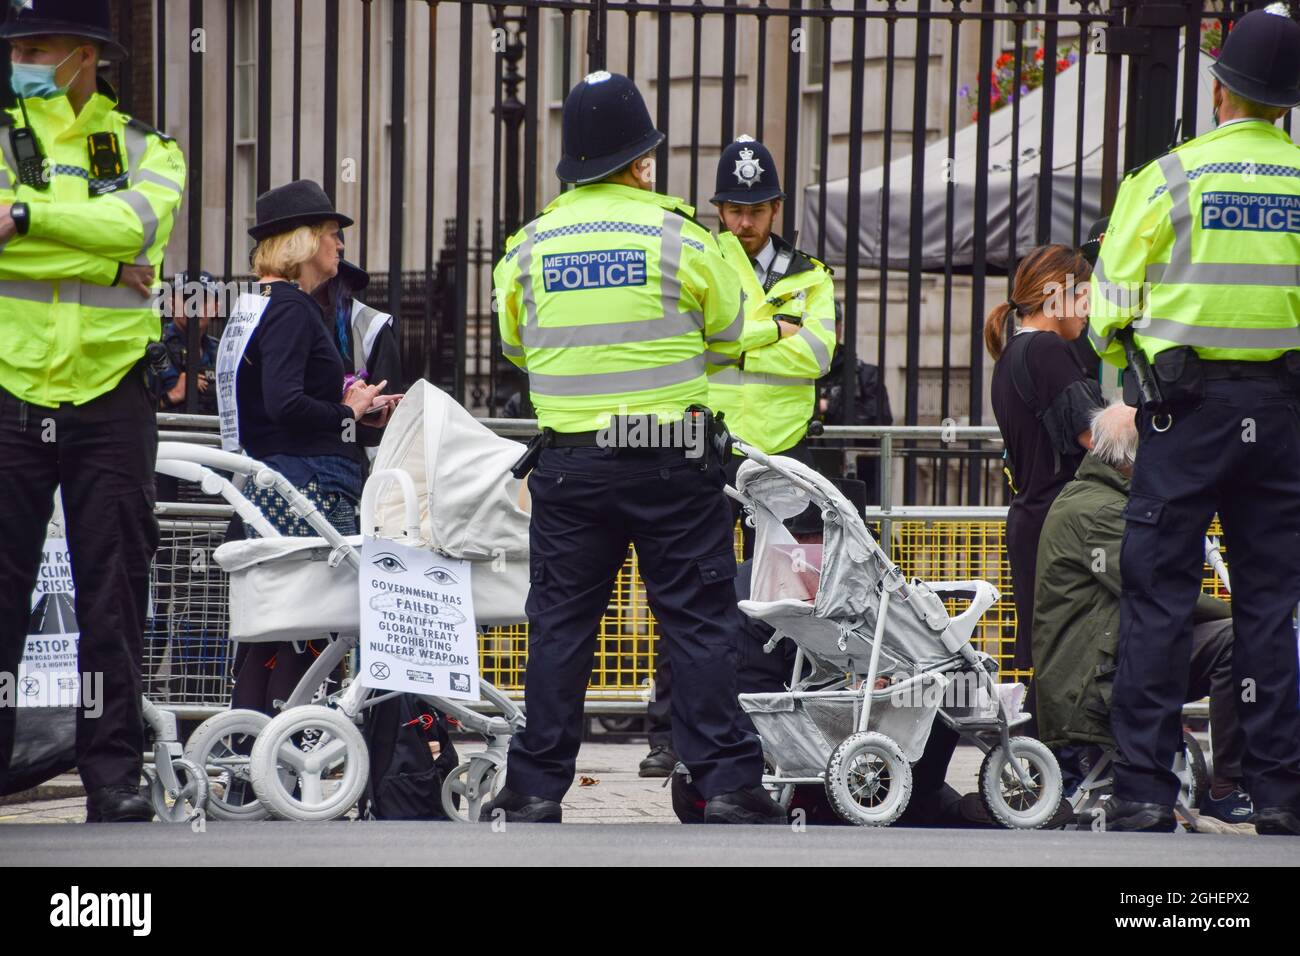 London, United Kingdom. 31st August 2021. Police observe protesters with prams outside Downing Street. Extinction Rebellion protesters dressed in black marched with prams in Westminster as part of their two-week Impossible Rebellion campaign. Stock Photo